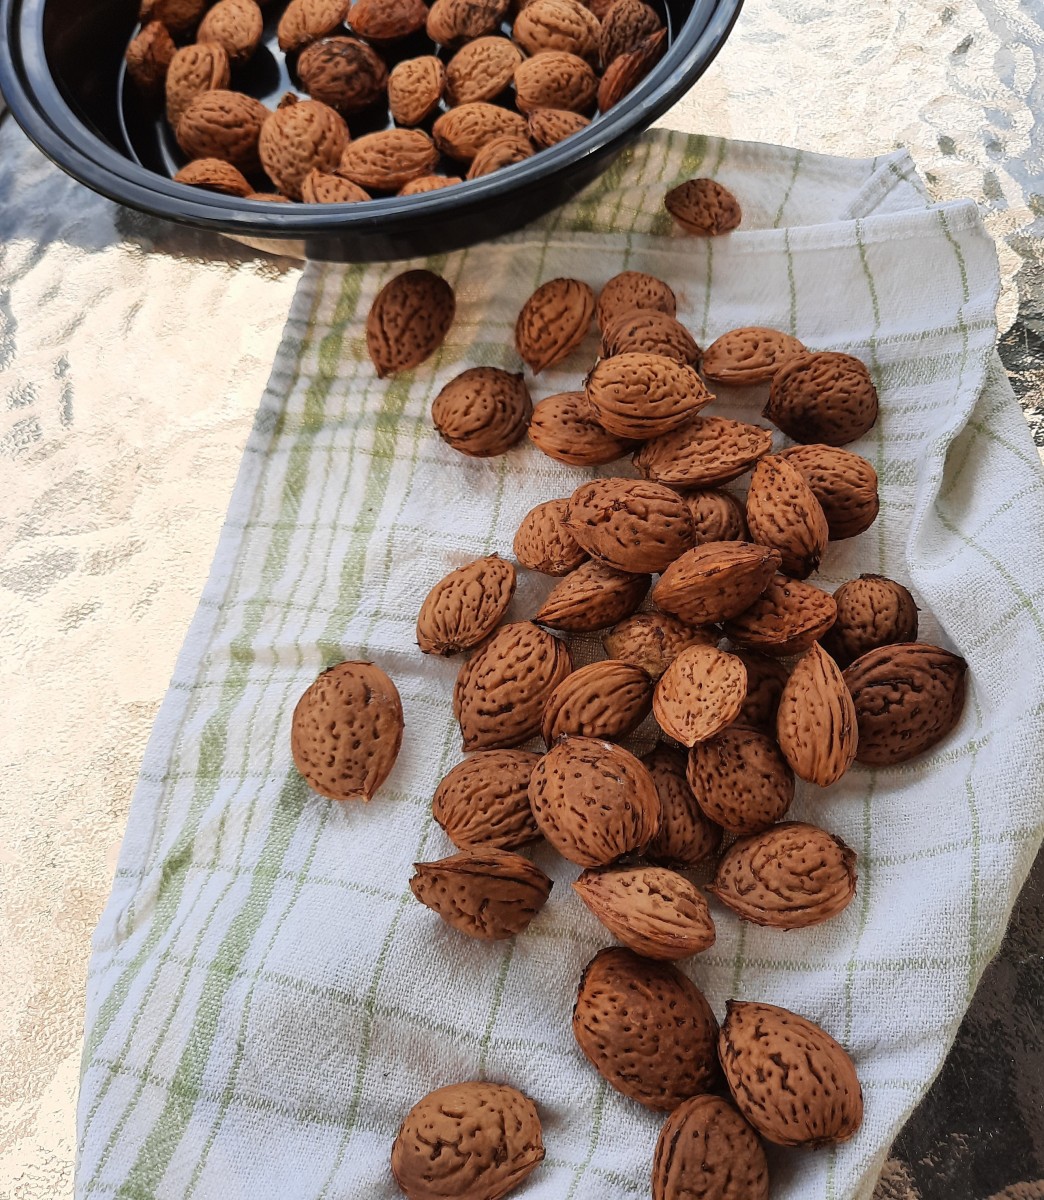 How to Harvest and Roast Almonds in Pennsylvania